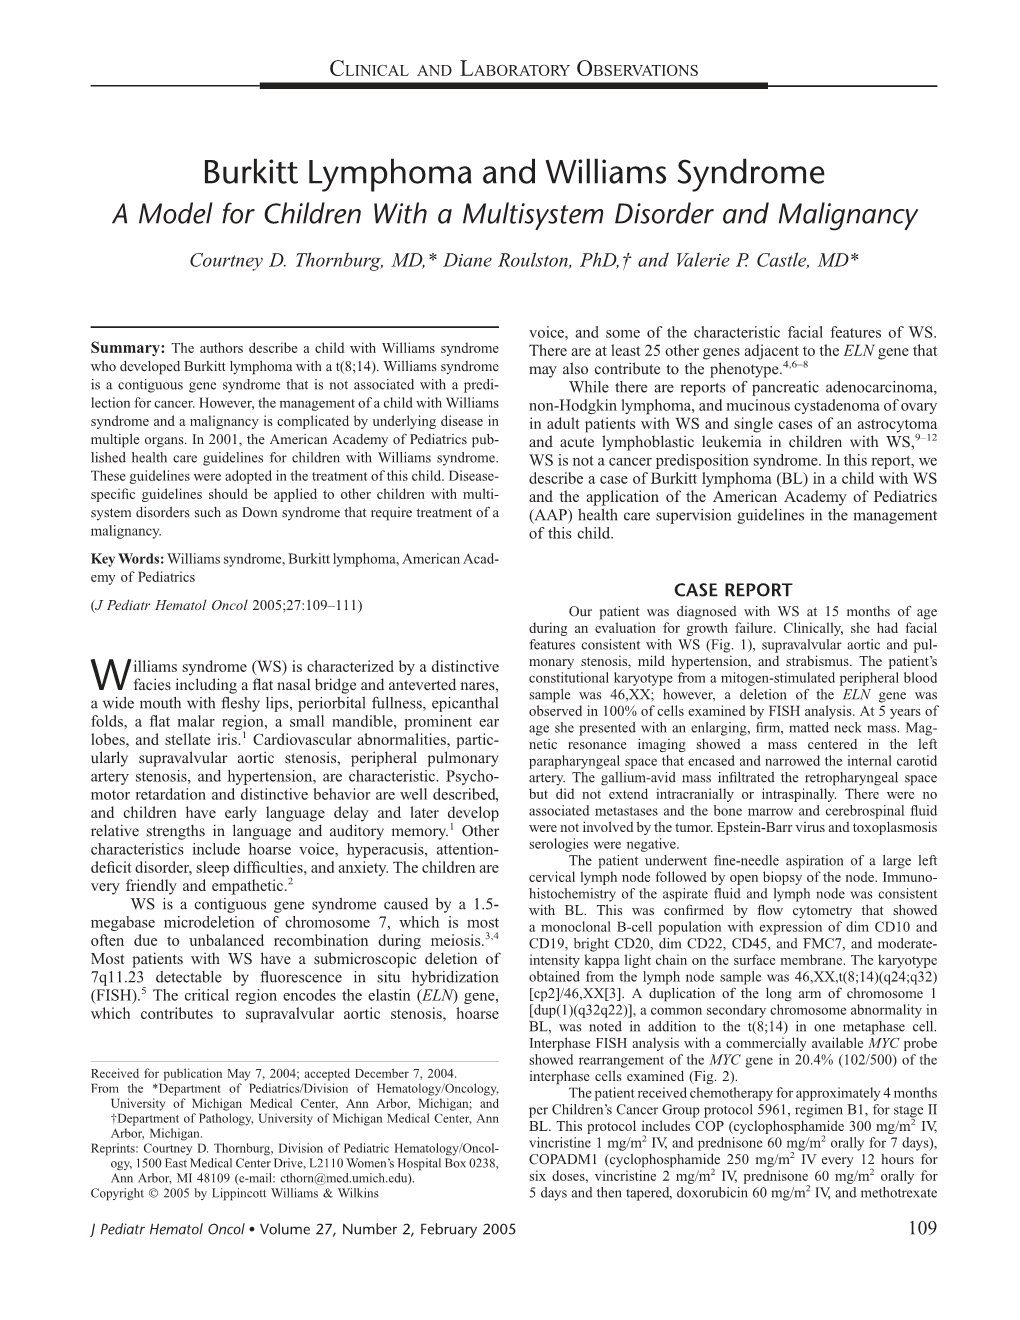 Burkitt Lymphoma and Williams Syndrome a Model for Children with a Multisystem Disorder and Malignancy